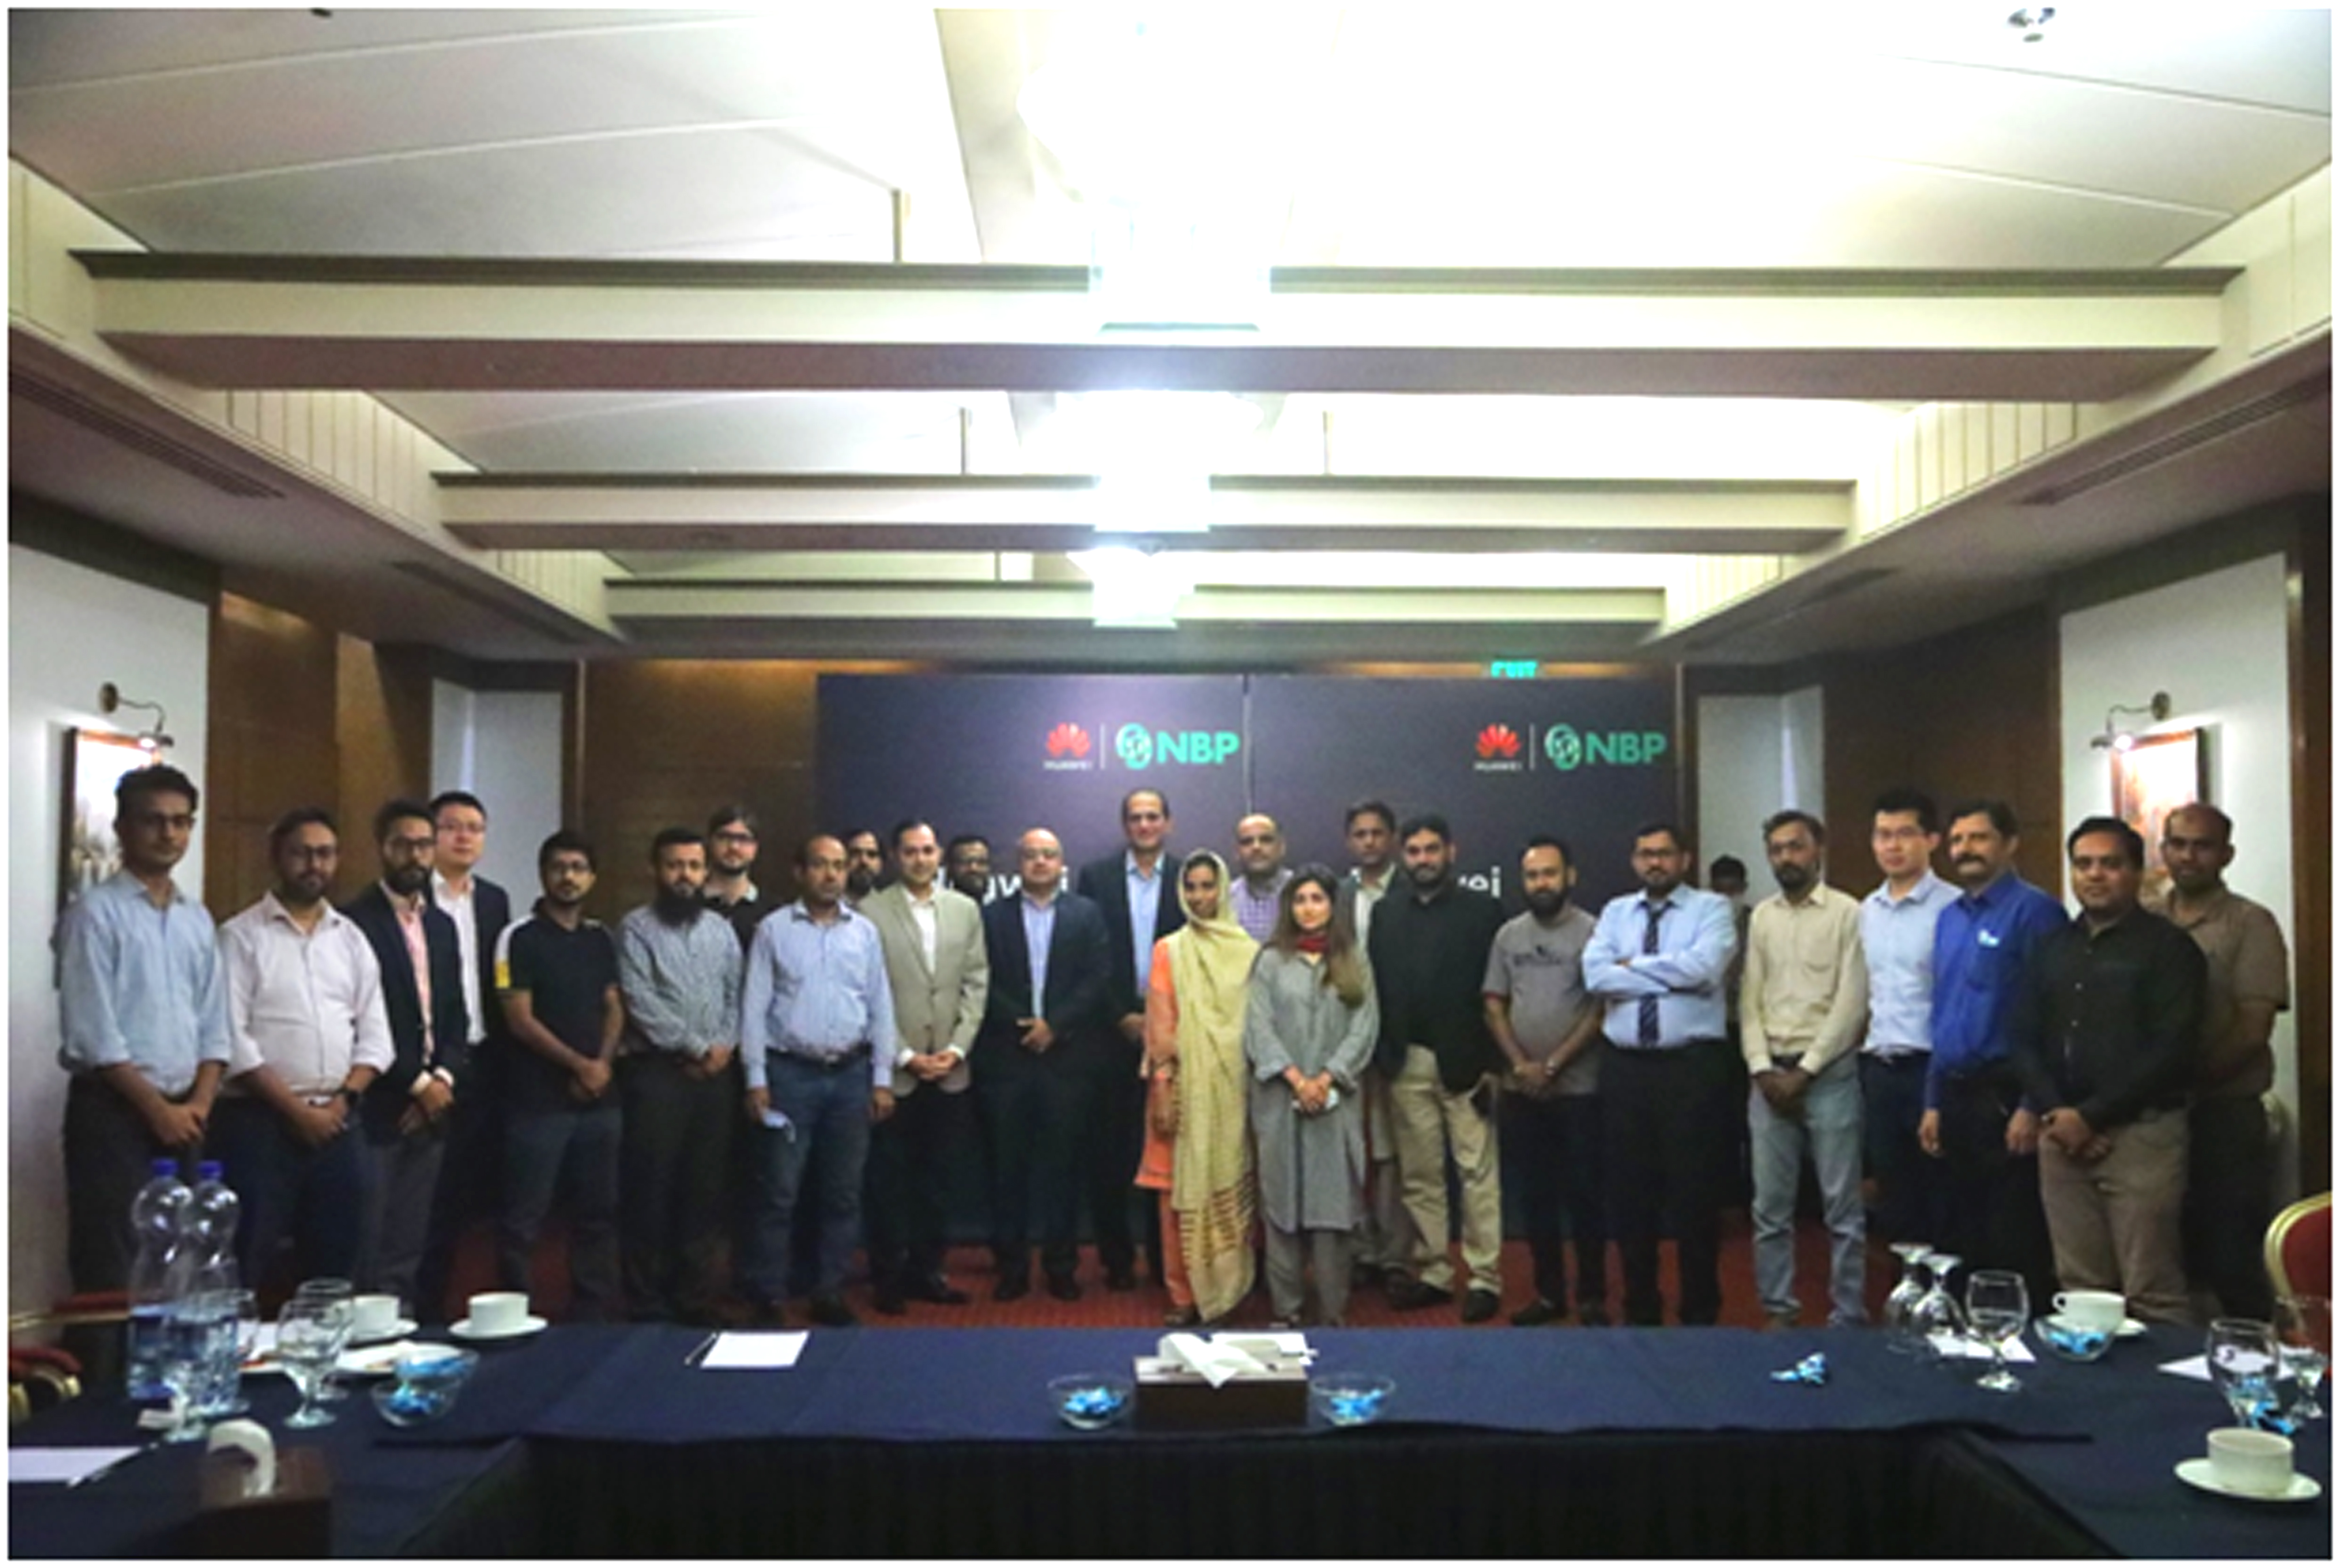 Huawei Pakistan Holds Technology Workshop for NBP Bank